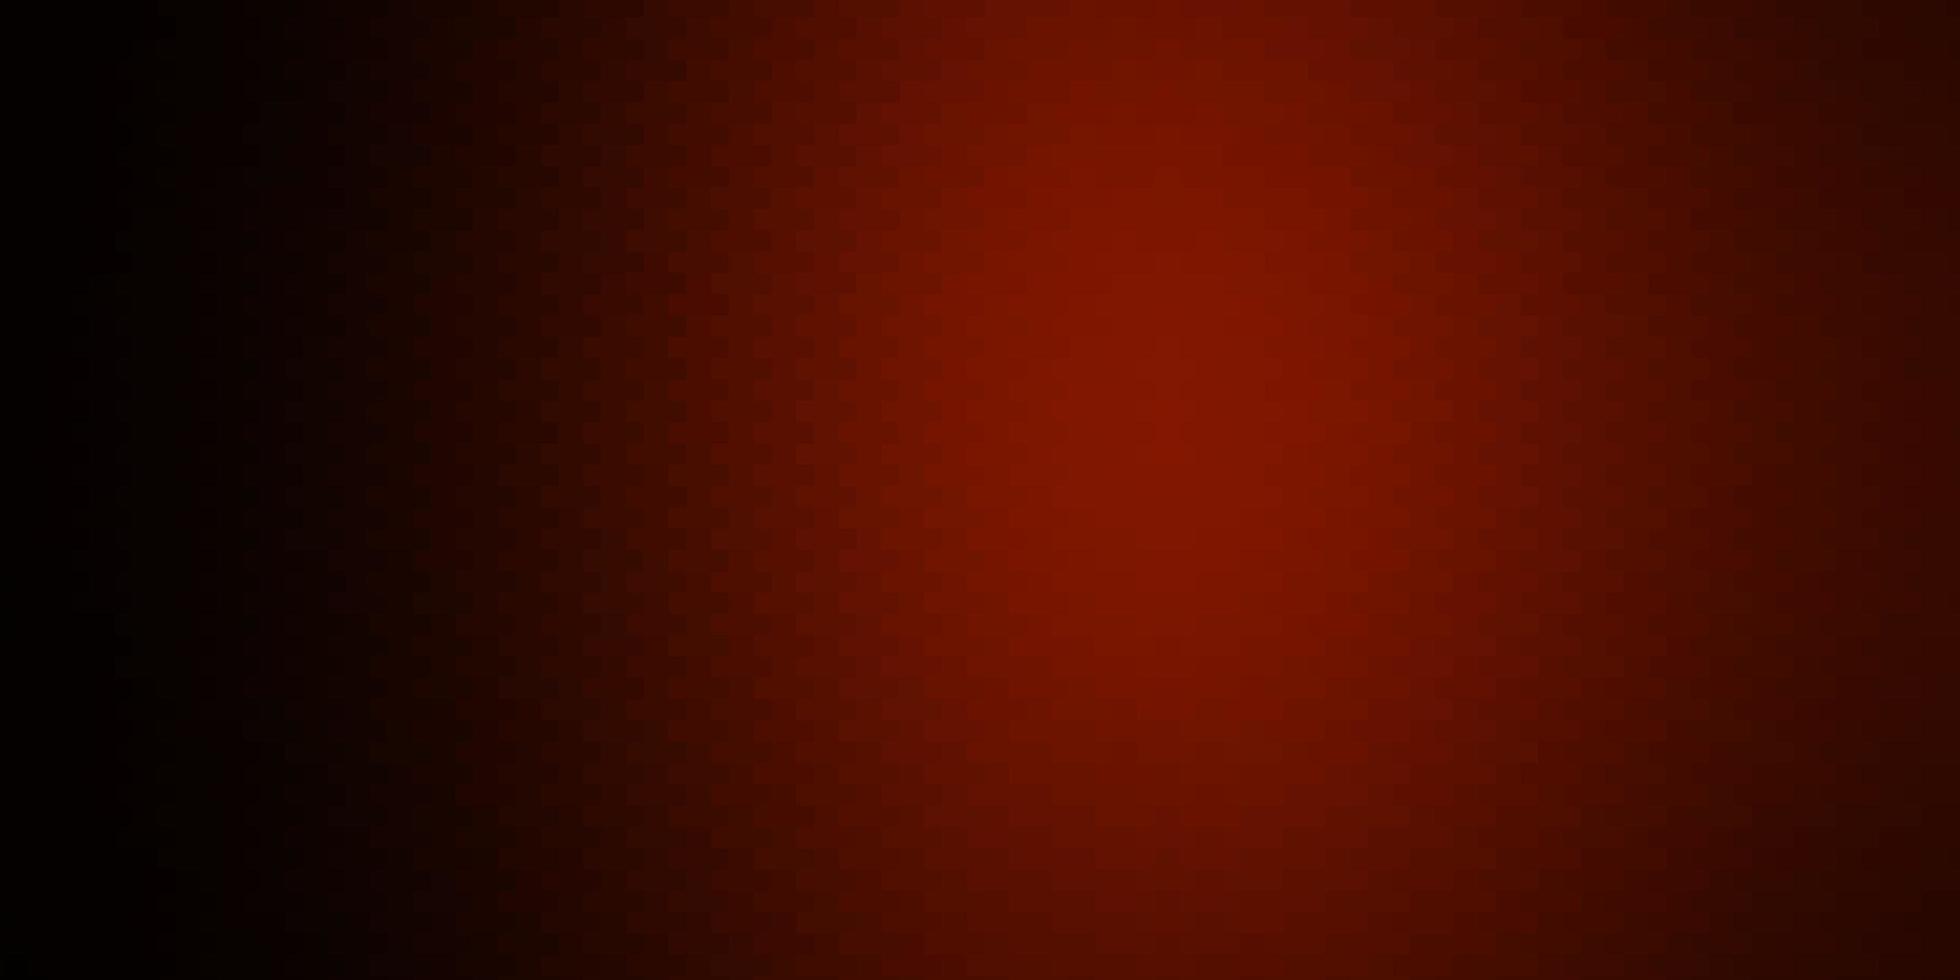 Dark Brown vector template with rectangles.